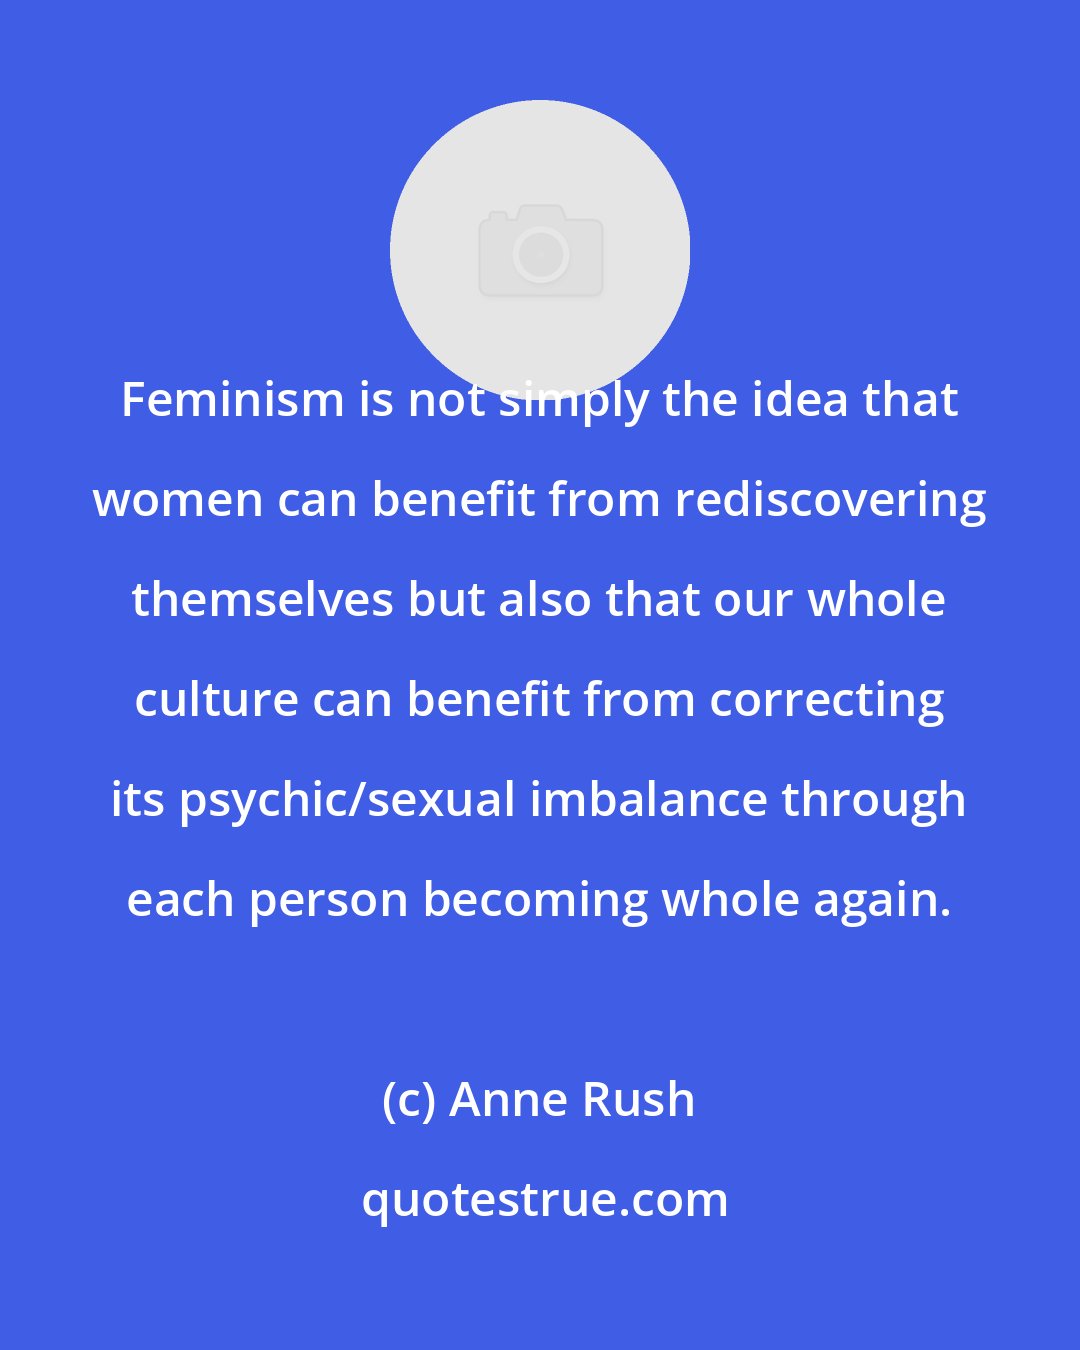 Anne Rush: Feminism is not simply the idea that women can benefit from rediscovering themselves but also that our whole culture can benefit from correcting its psychic/sexual imbalance through each person becoming whole again.